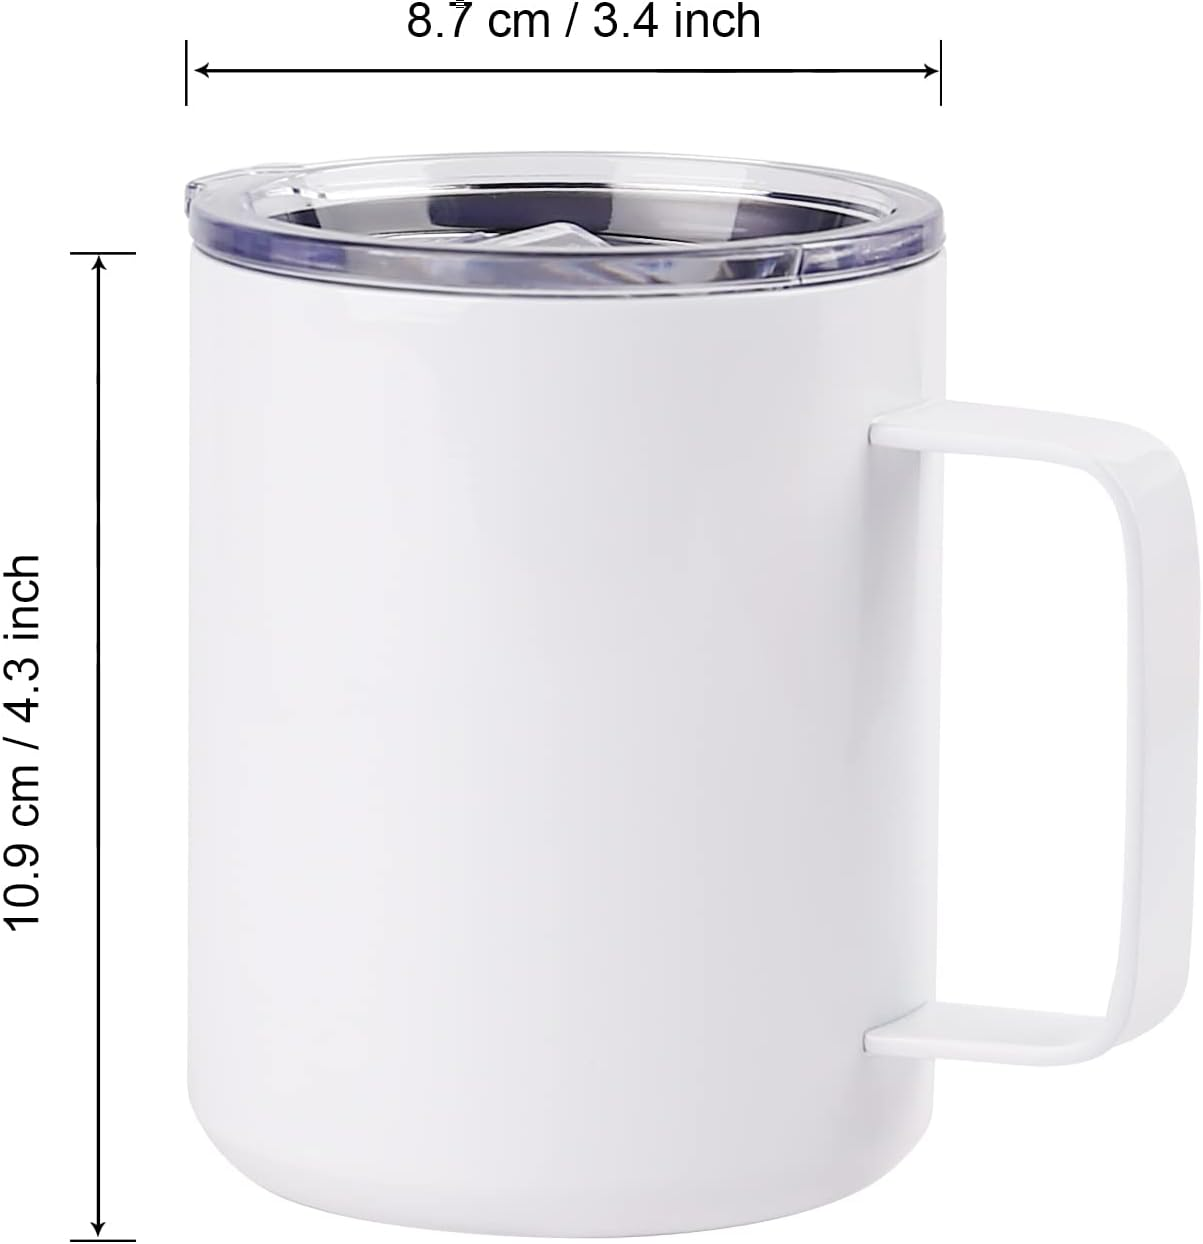 10 oz Stainless Steel Straight Coffee Mug with Slide Lid and